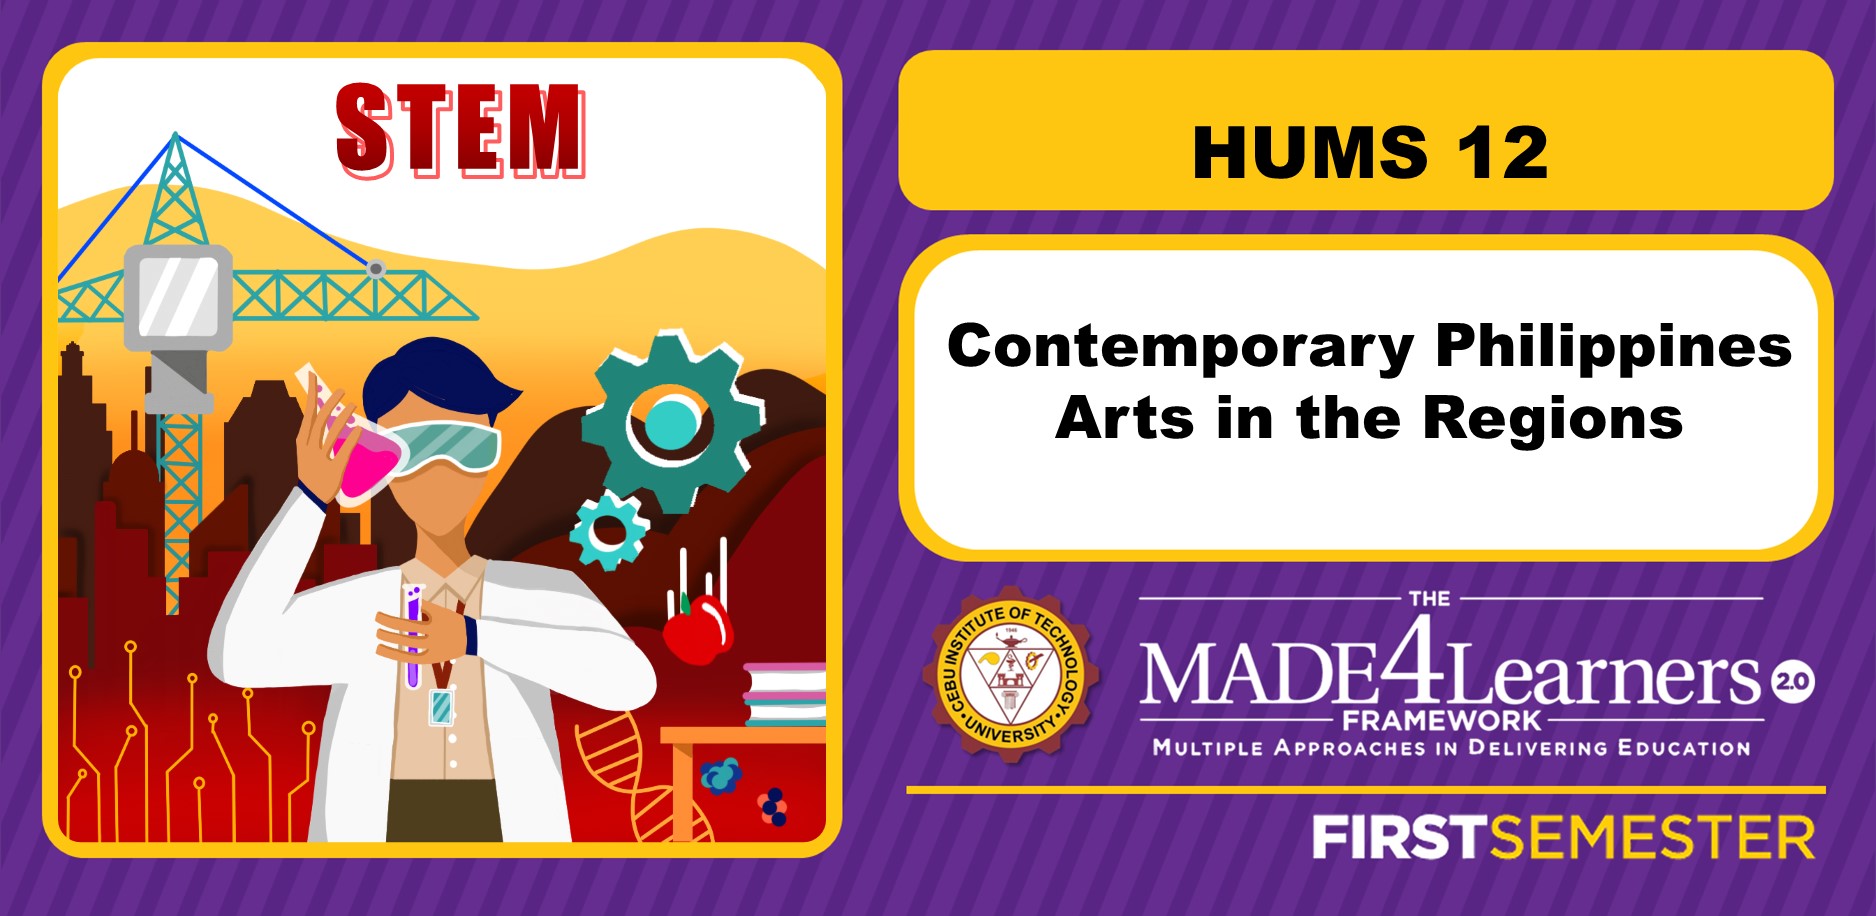 HUMS12: Contemporary Philippine Arts from the Regions (Lanit)